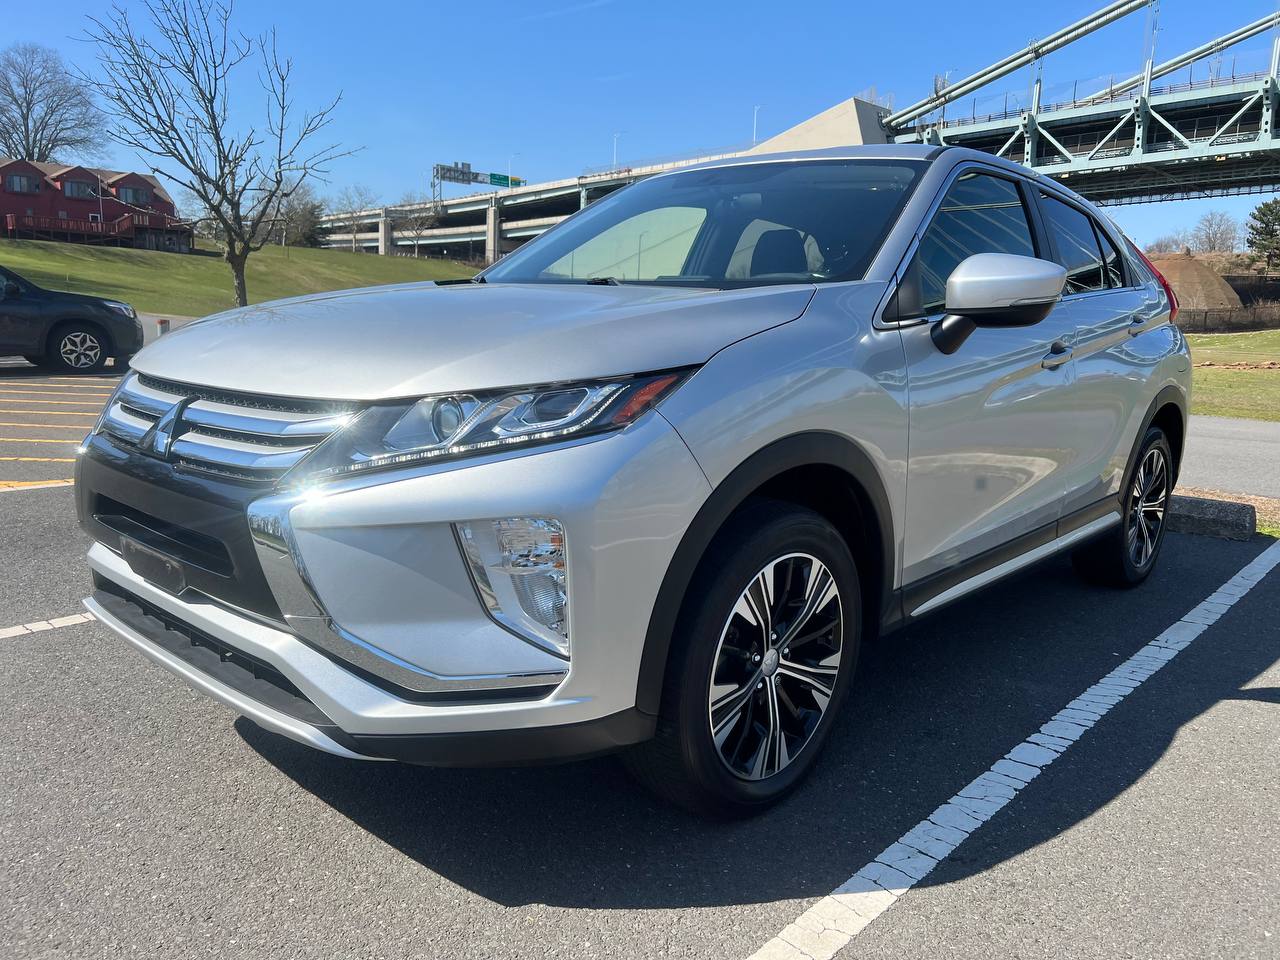 Used Car - 2019 Mitsubishi Eclipse Cross SE AWD for Sale in Staten Island, NY